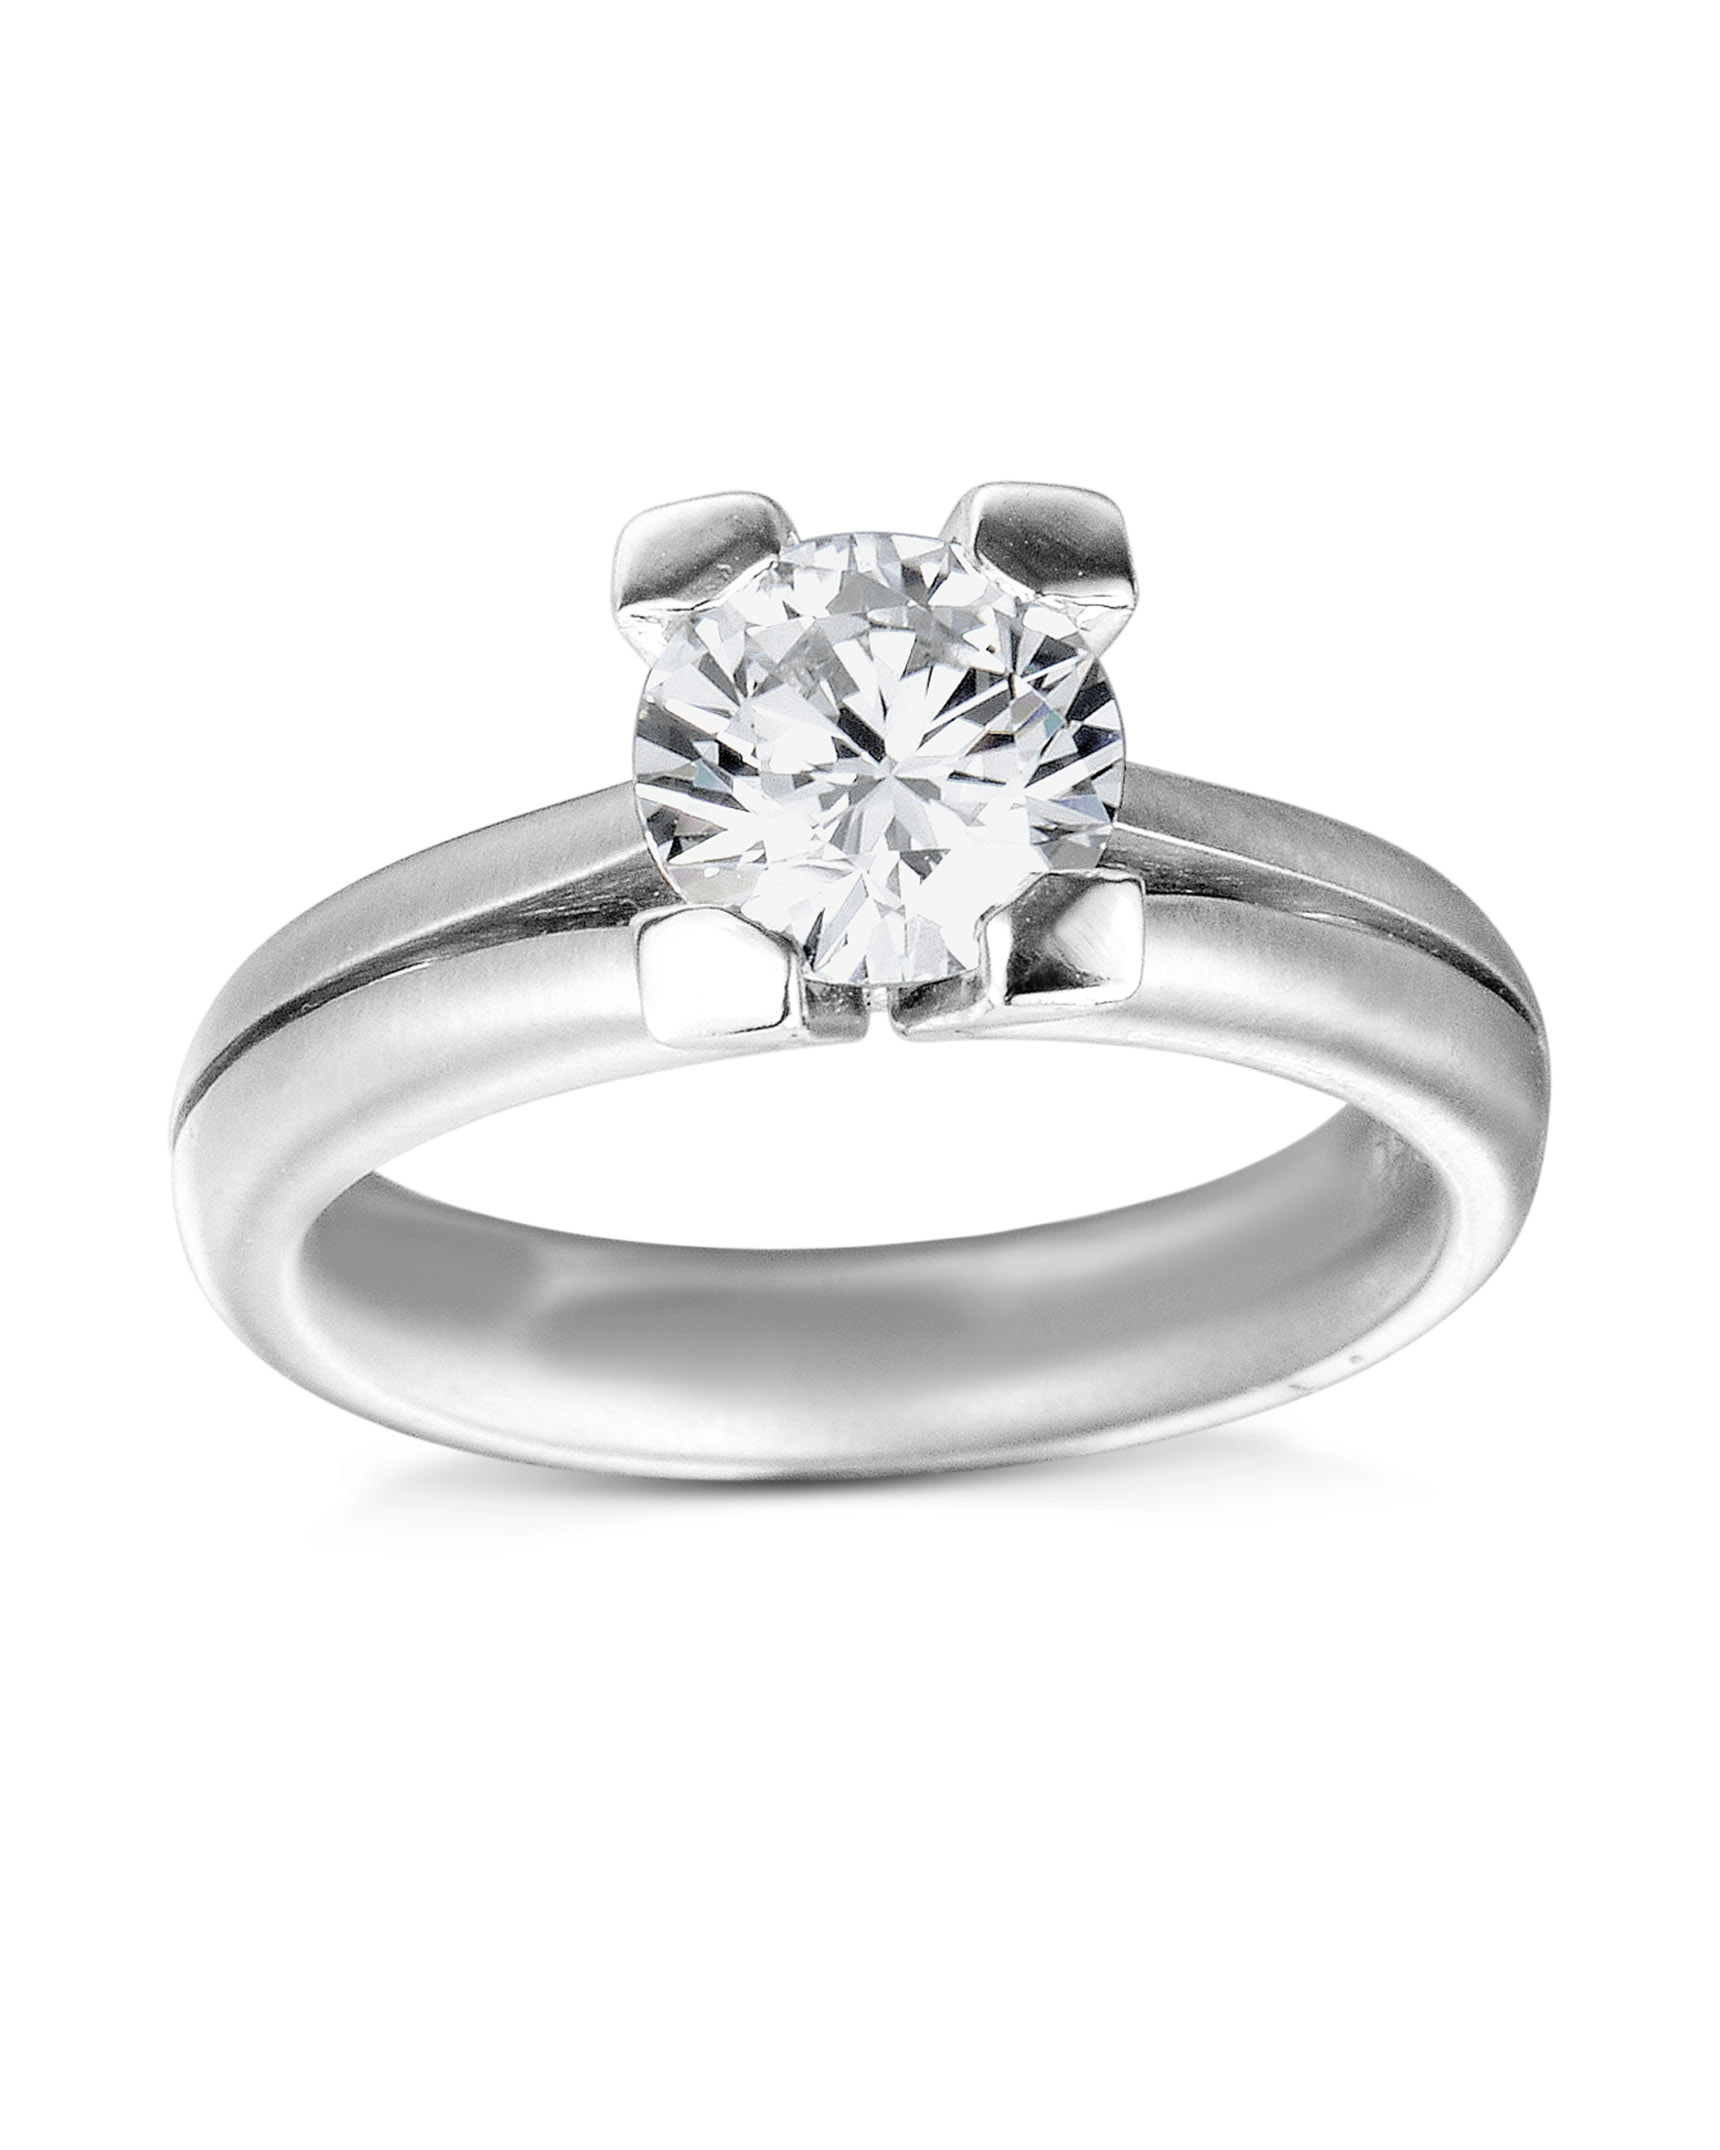 Low Profile Round Solitaire Engagement Ring with Diamond Prongs - BC Clark